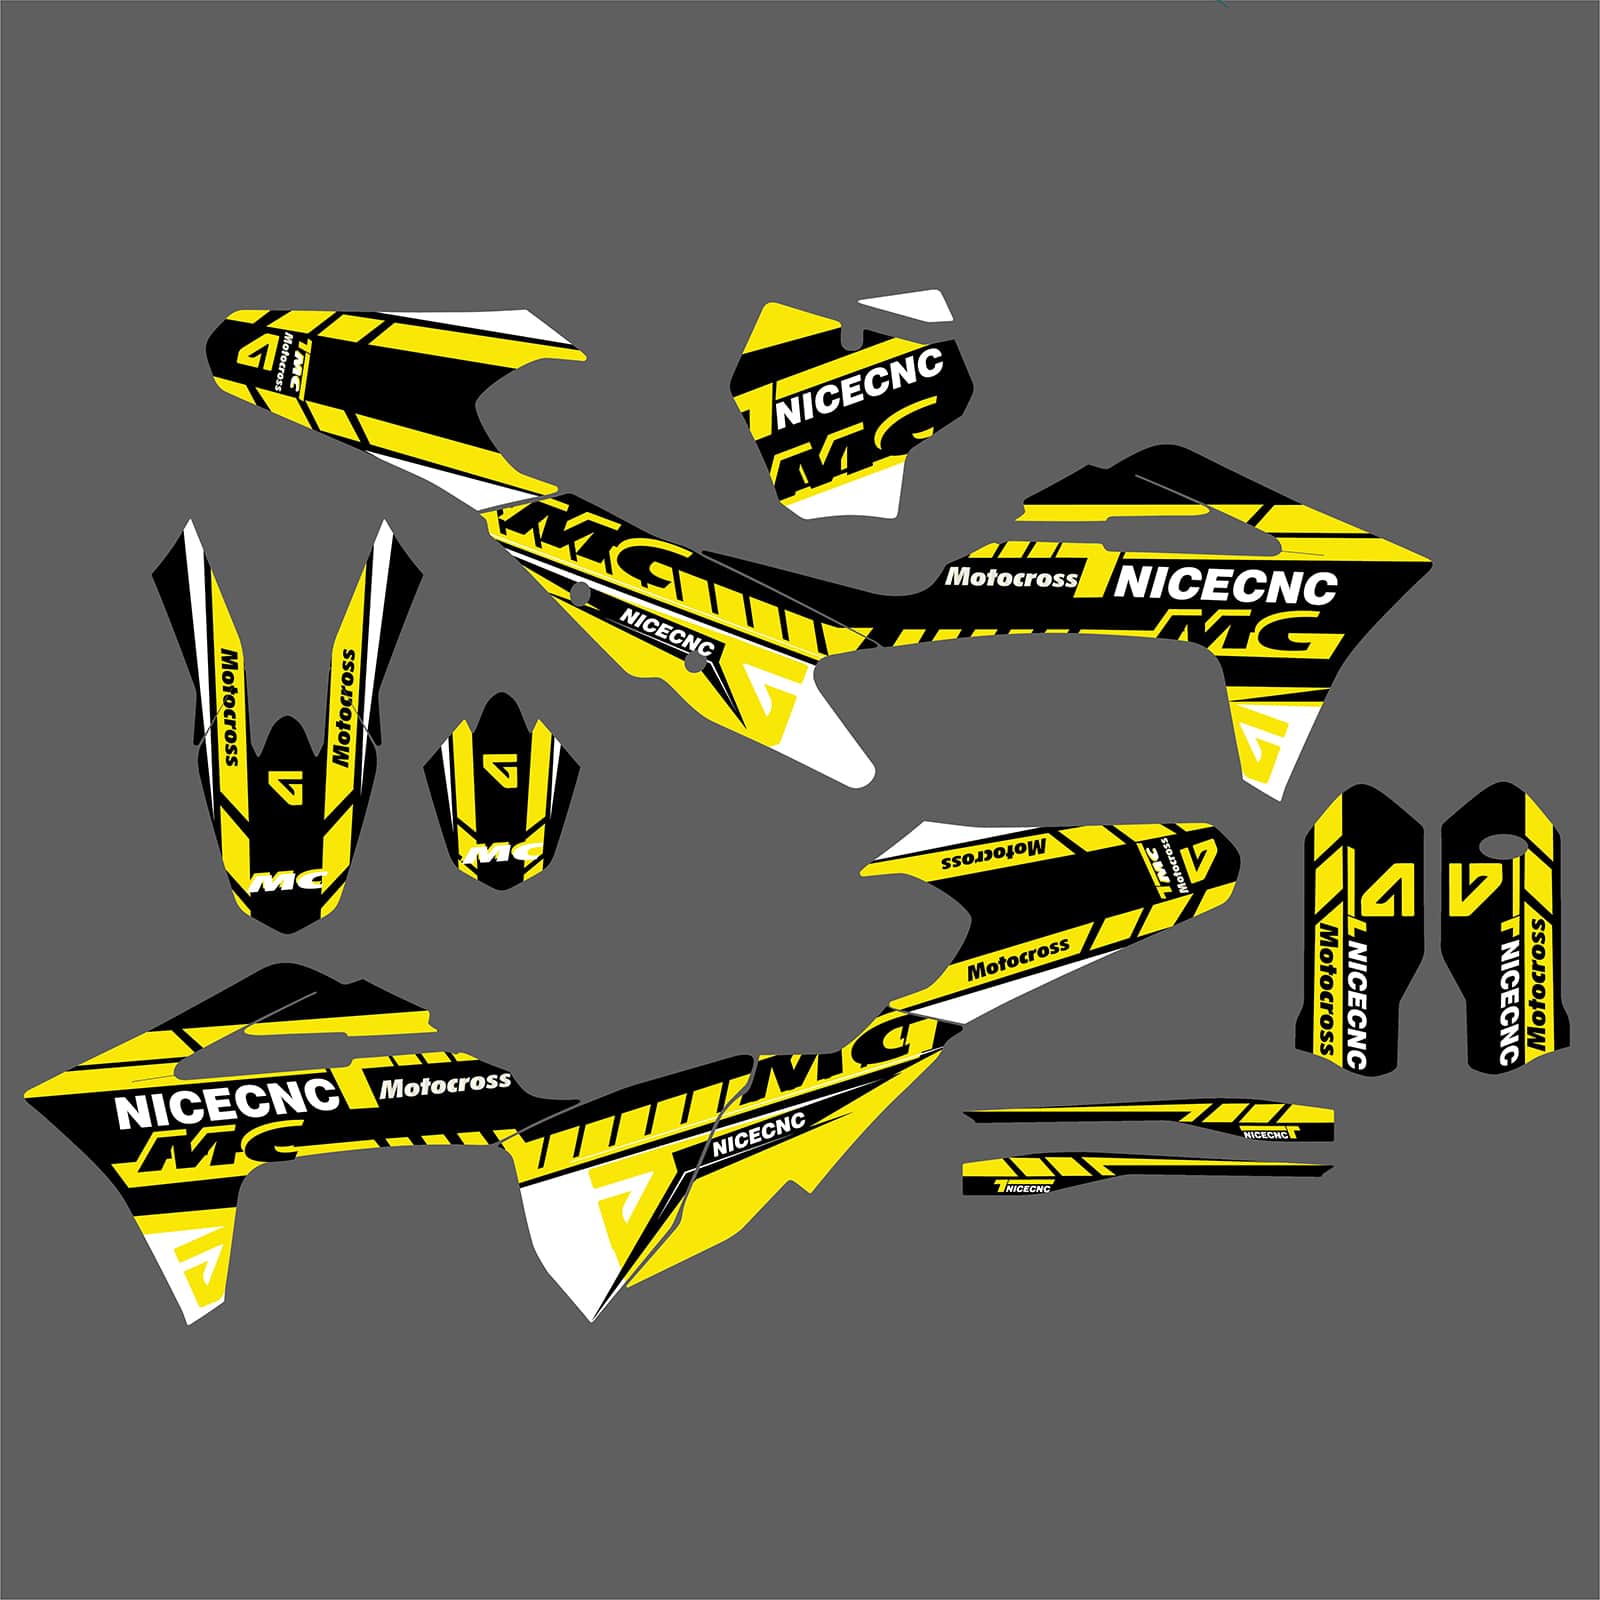 Motorcycle Team Full Graphics Background Sticker Decal Kits For GAS GAS MC Motocross 2021-2023